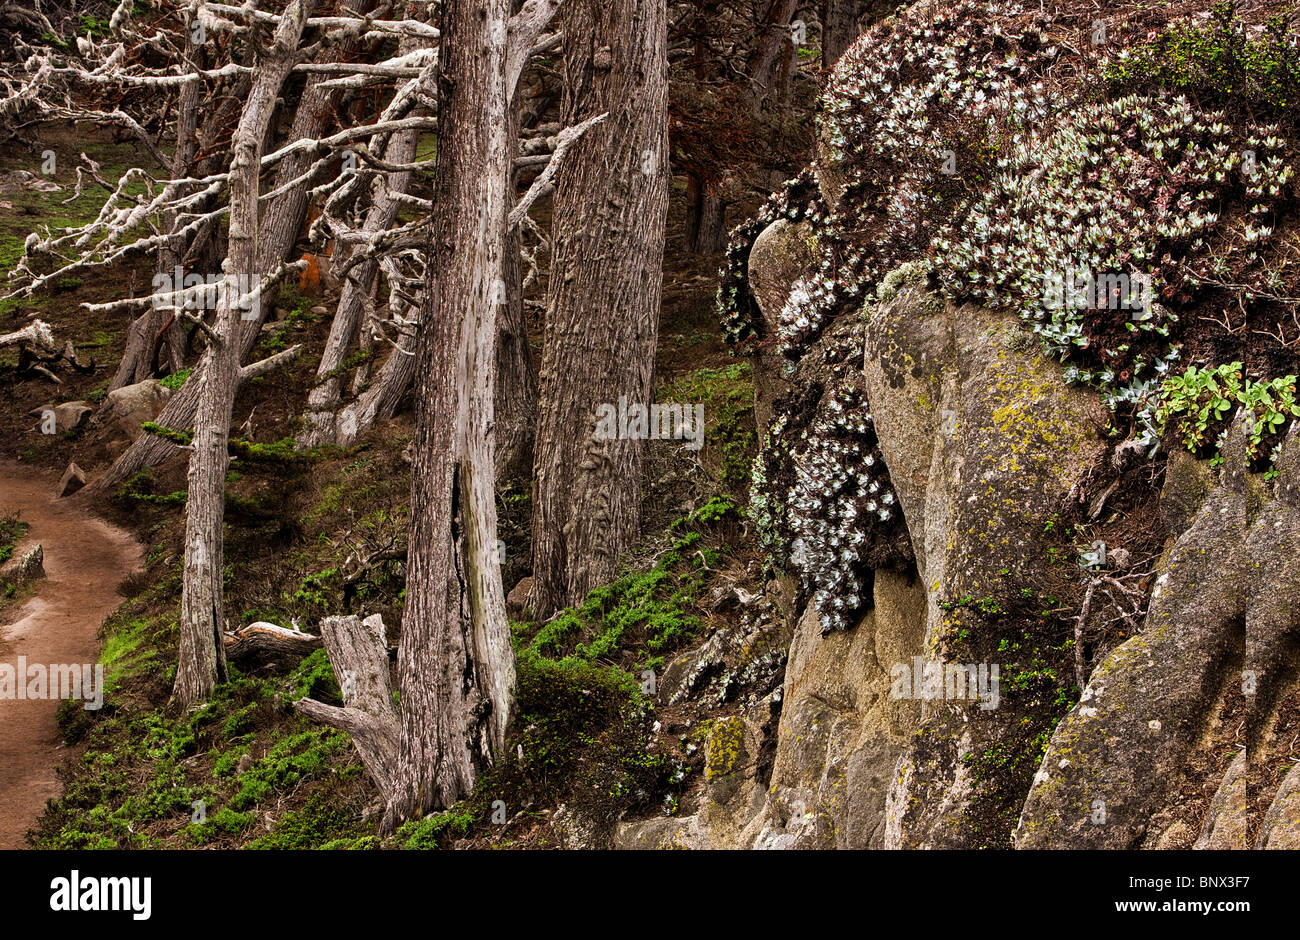 Succulents and ghost cypress trees, Point Lobos State Reserve, California, USA. Stock Photo